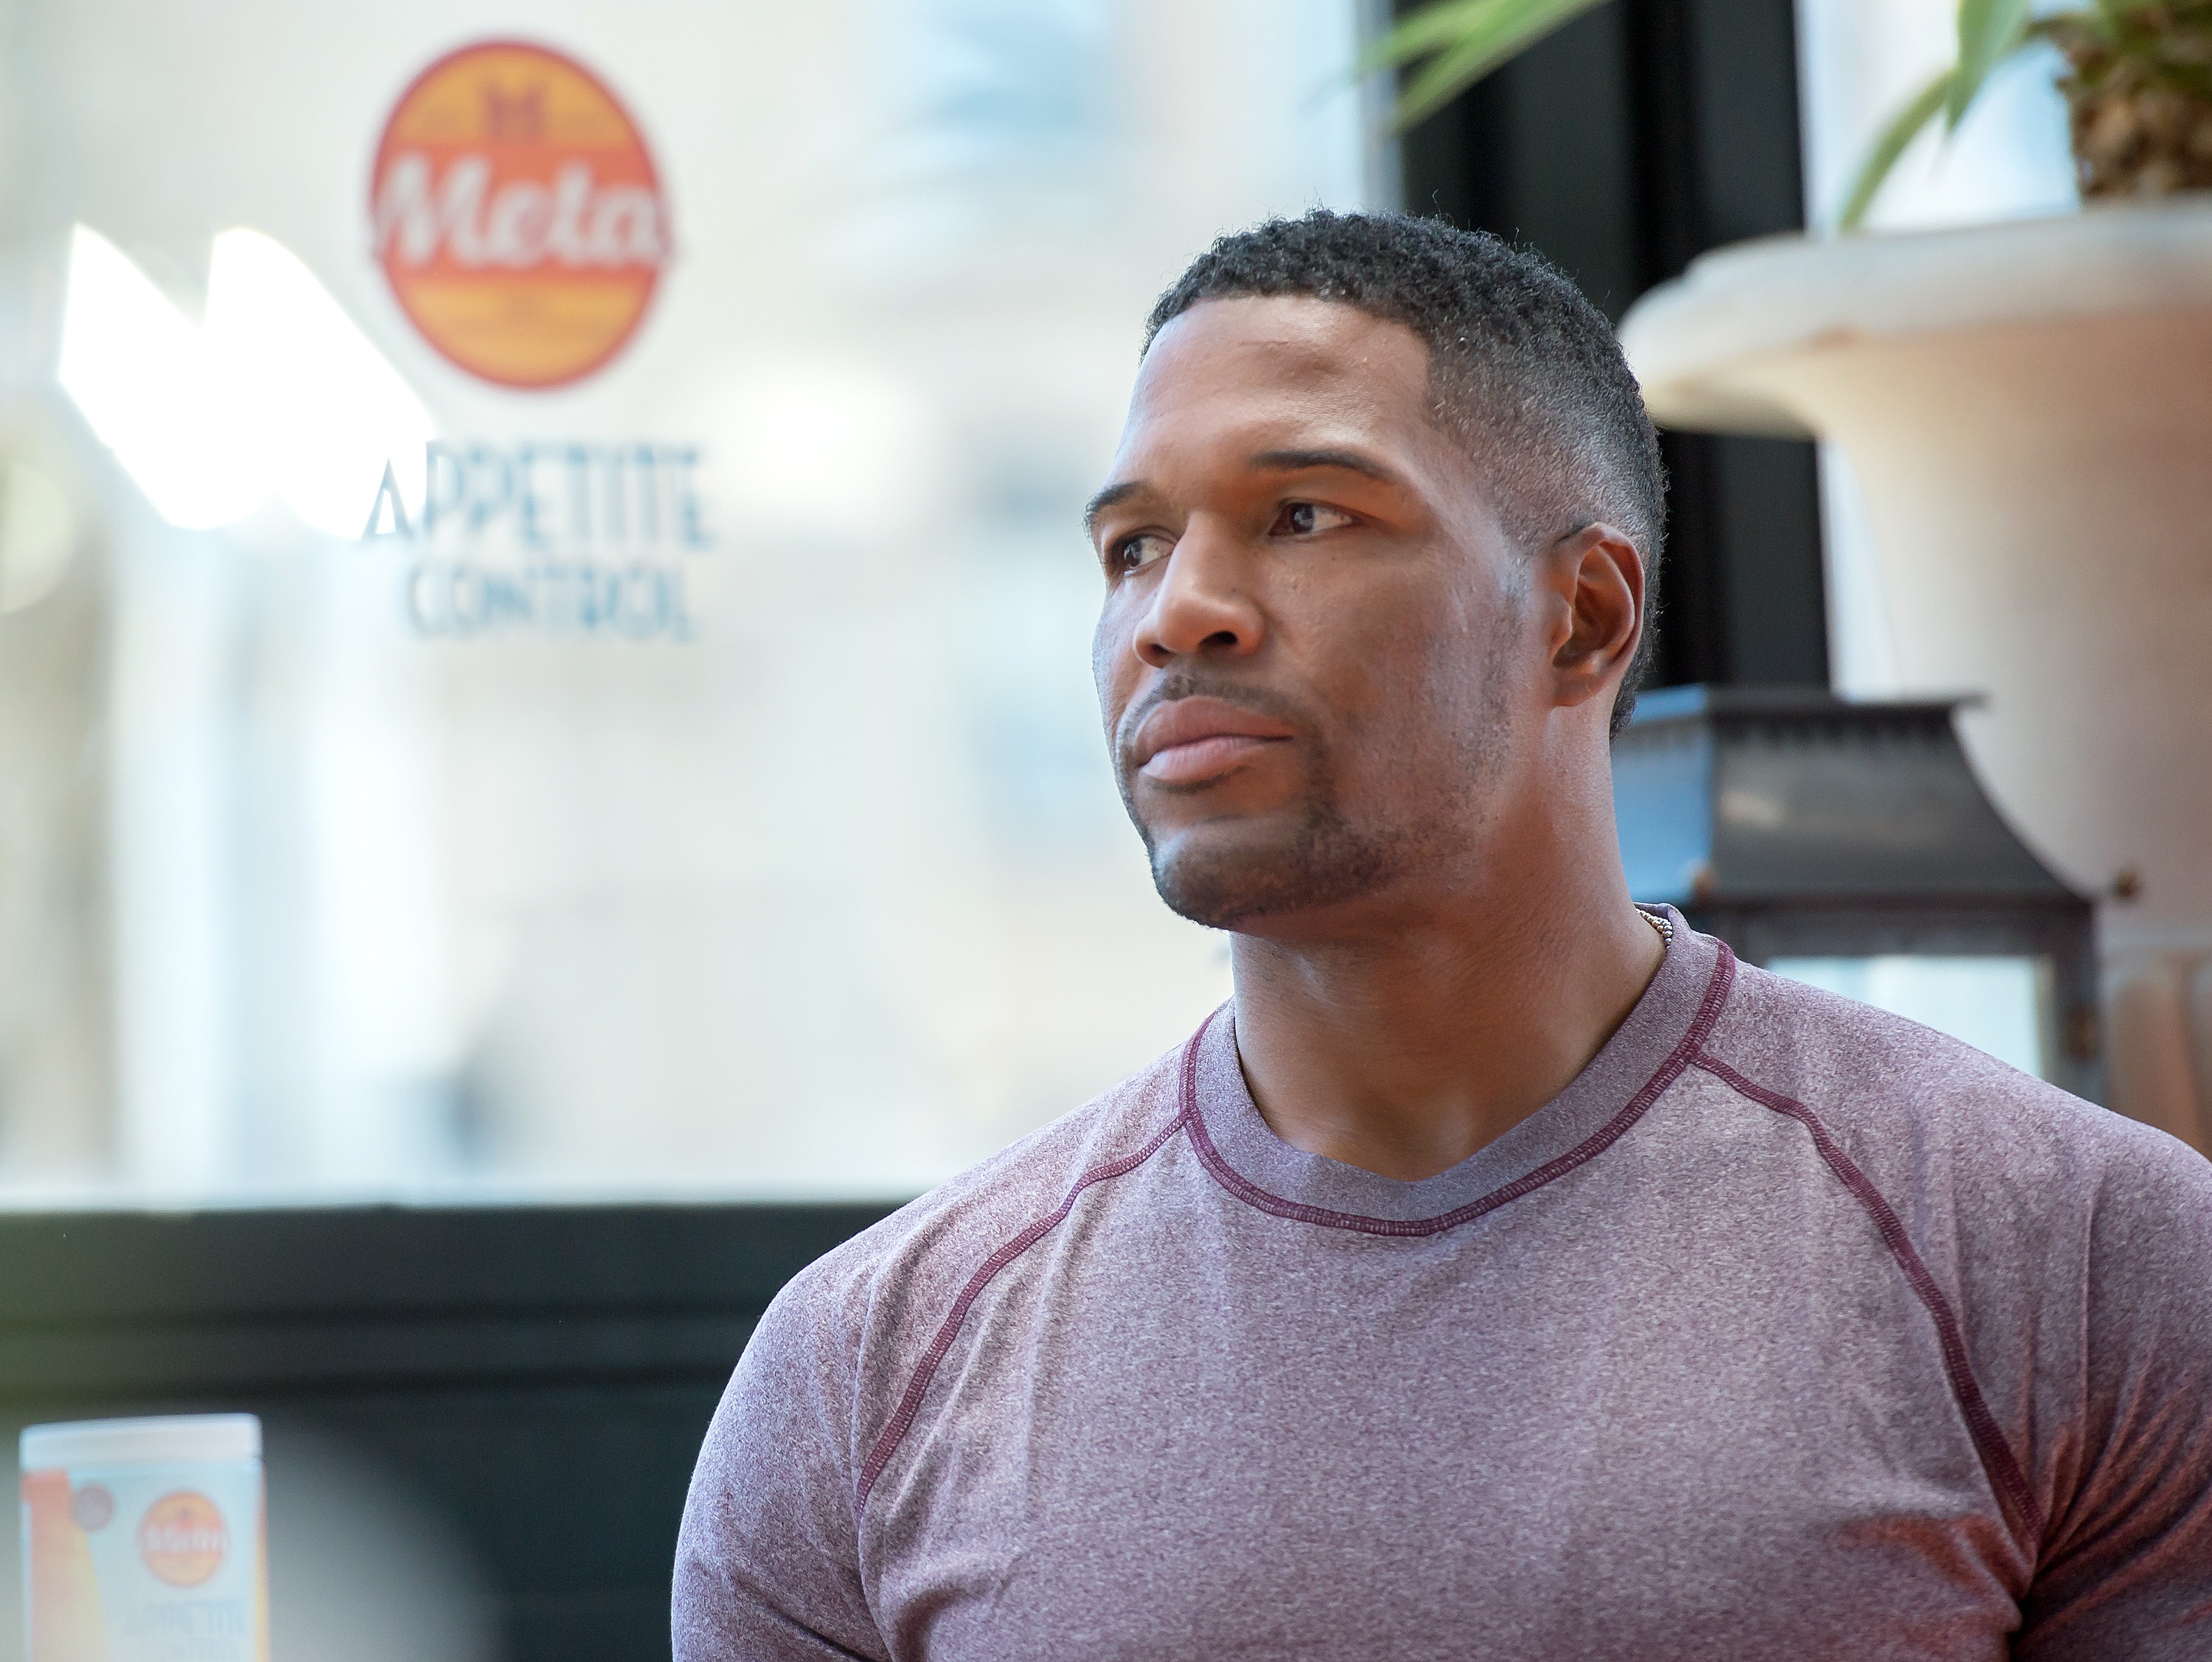 Former New York Giants player Michael Strahan at a 2016 event